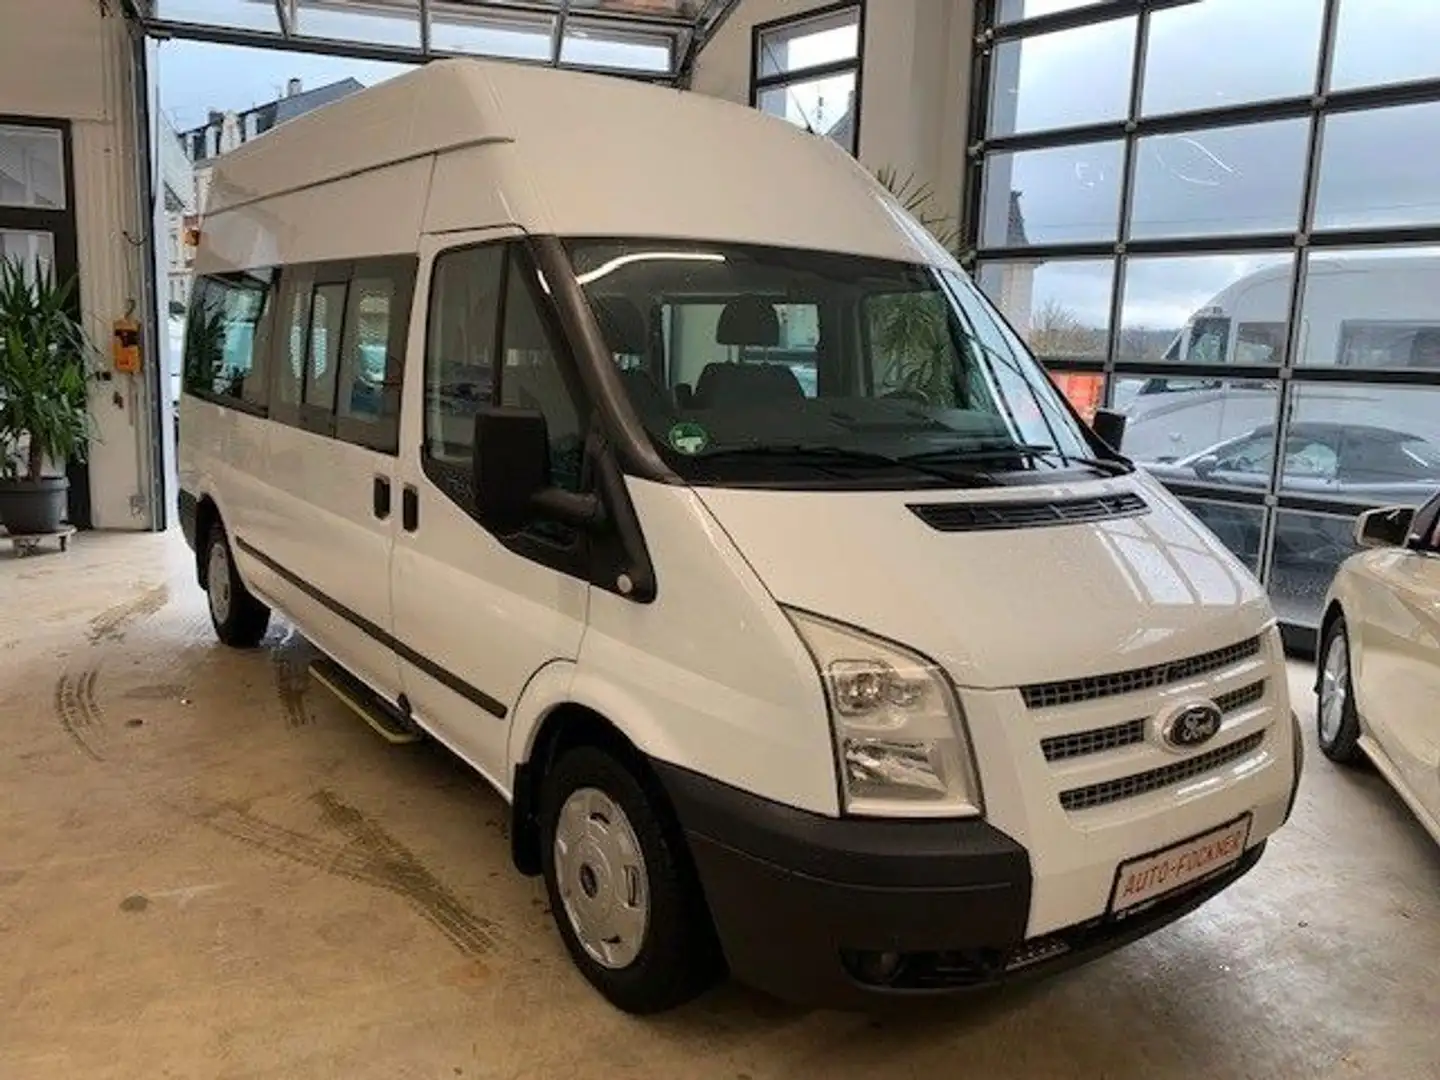 Ford Transit 2.2 TDCi extrahoch lang Lift Systemboden Weiß - 1